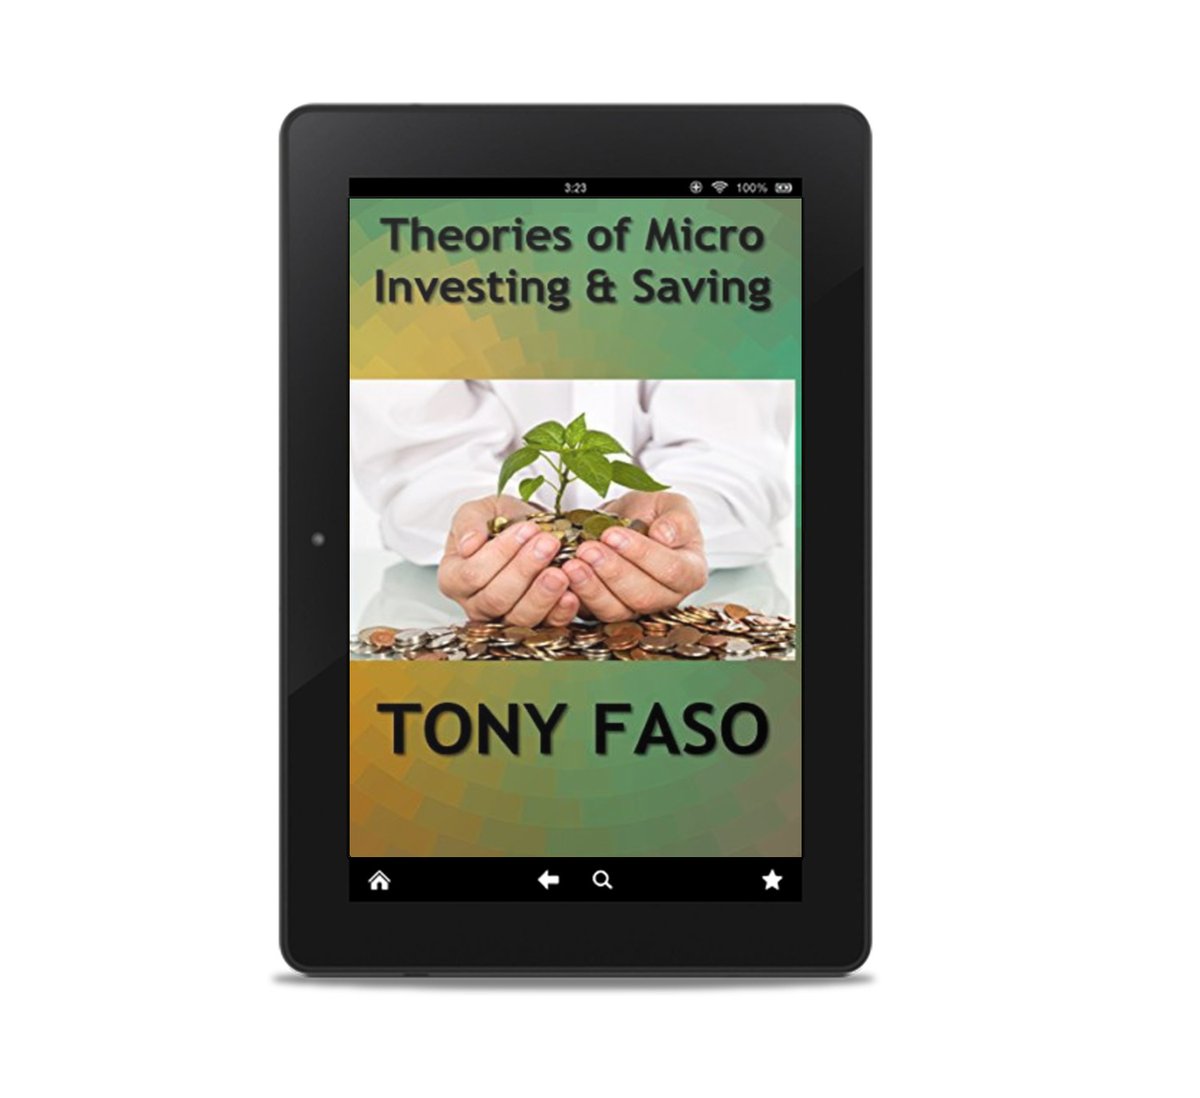 The Theories of Micro Investing / Saving by Tony Faso
amzn.to/2GrAu4O?utm_so…
Plain language and simple explanations help anyone who wants to know about investing and saving in basic terms.
99¢ & #READ #FREE on Kindle Unlimited